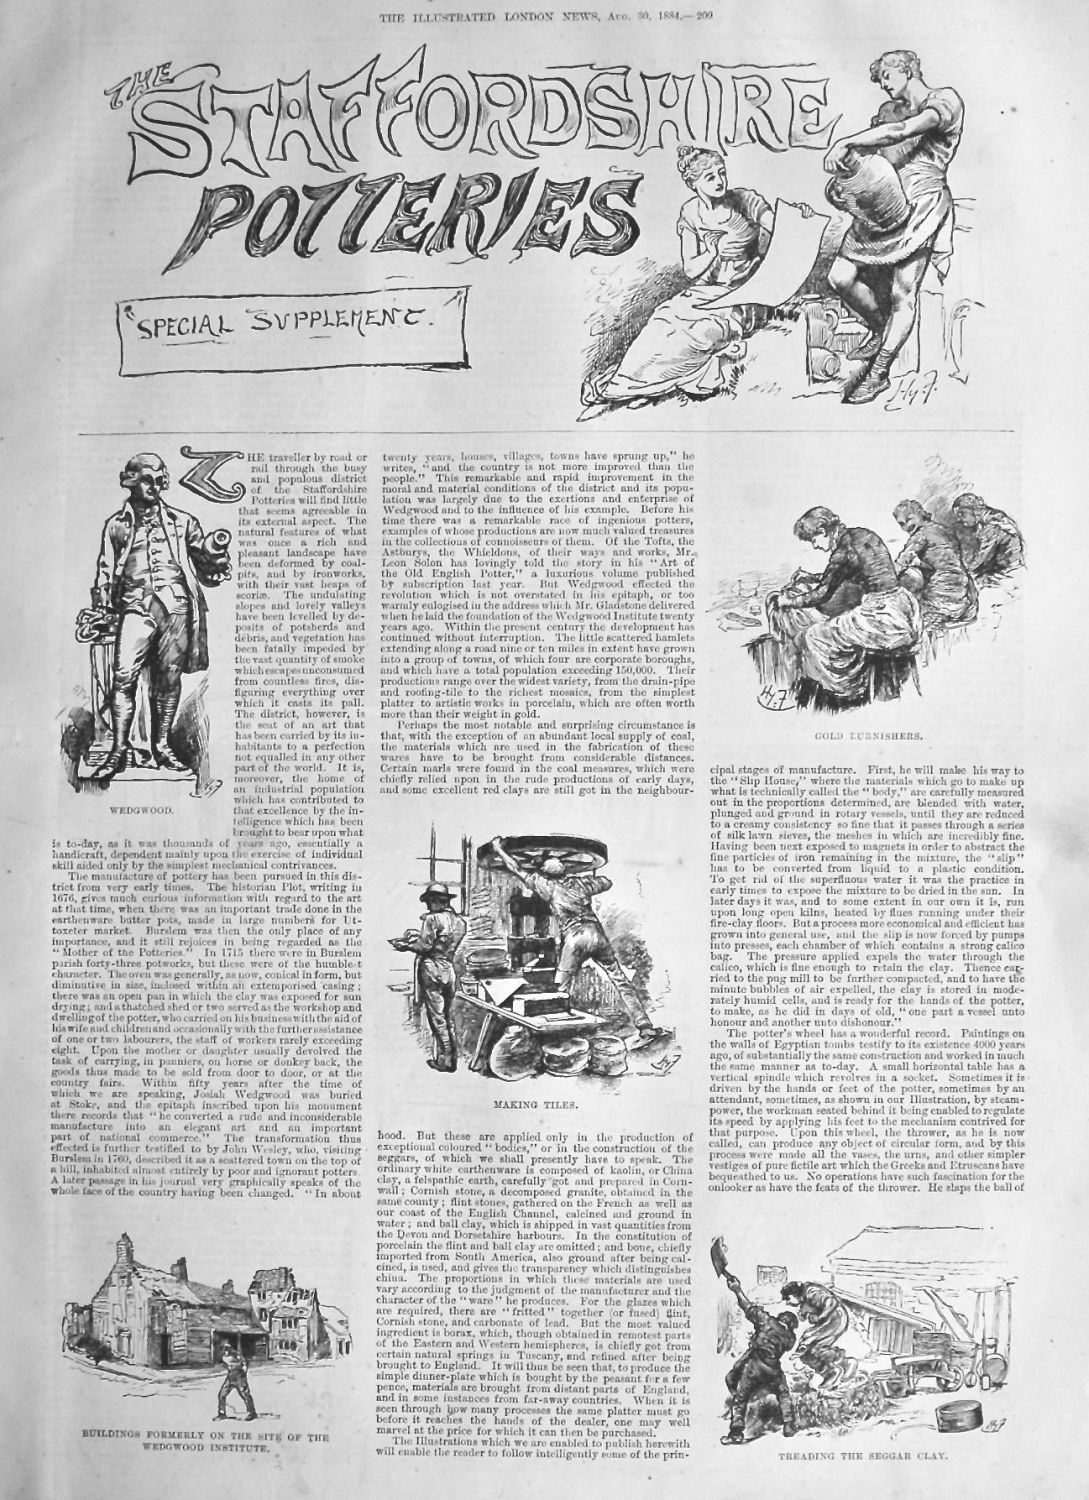 The Staffordshire Potteries.  (Special Supplement).  1884.